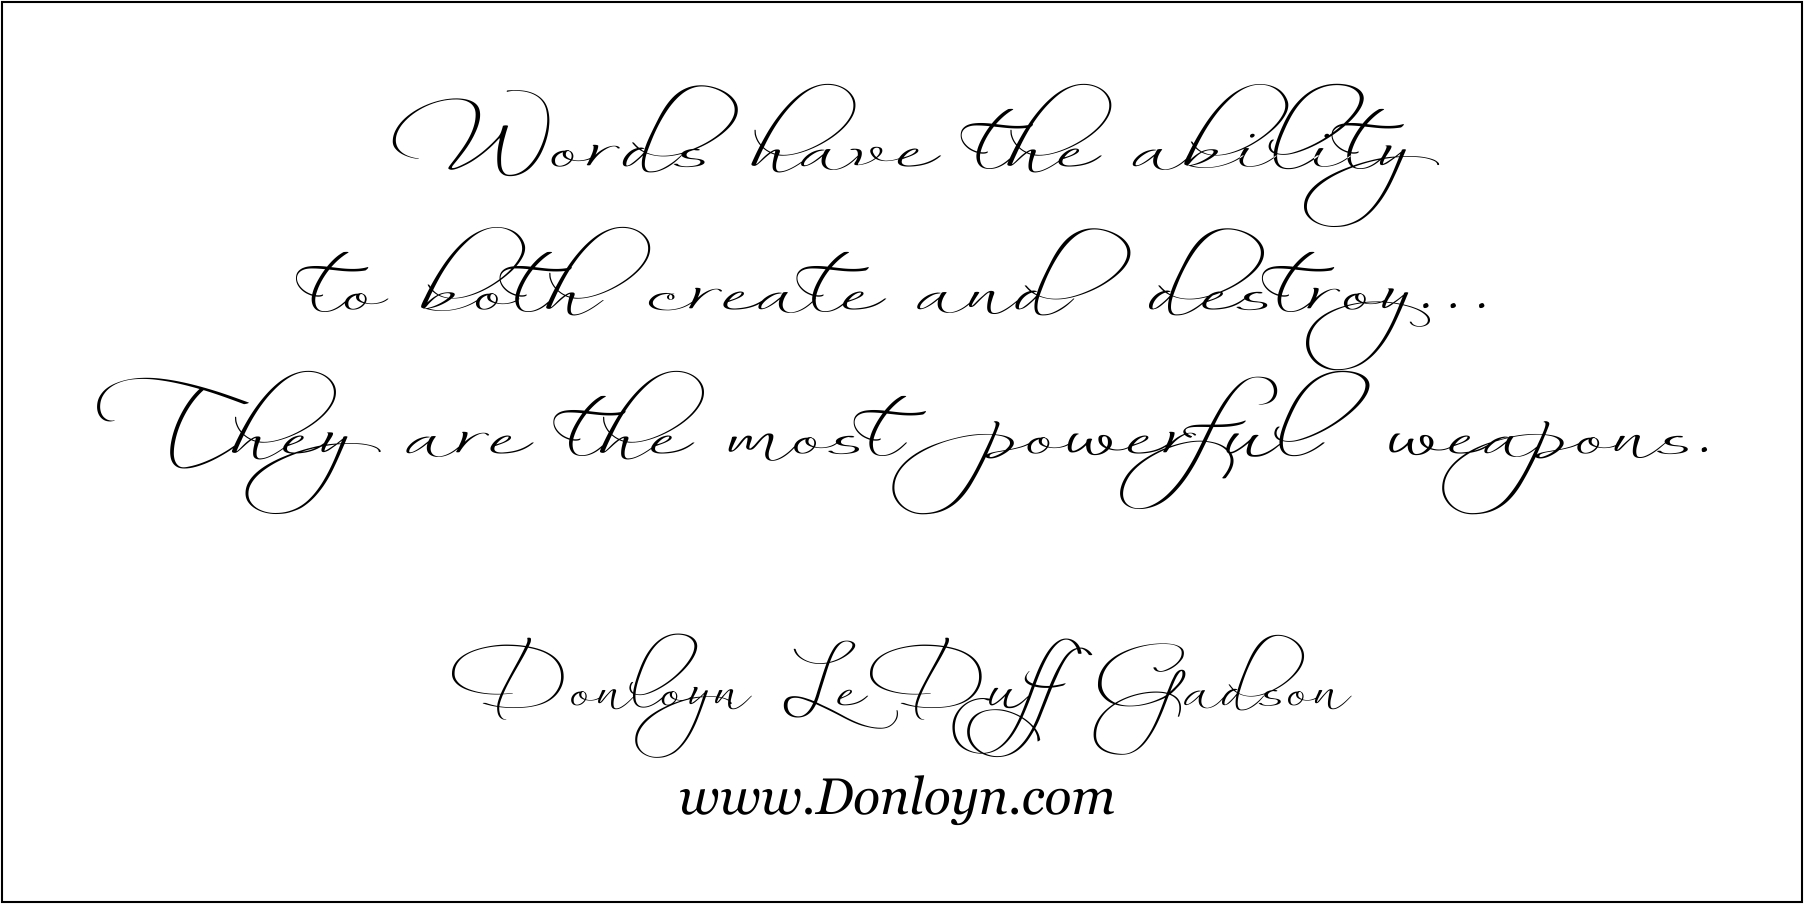 Words are powerful and, sometimes, they hurt... ~ Donloyn LeDuff Gadson